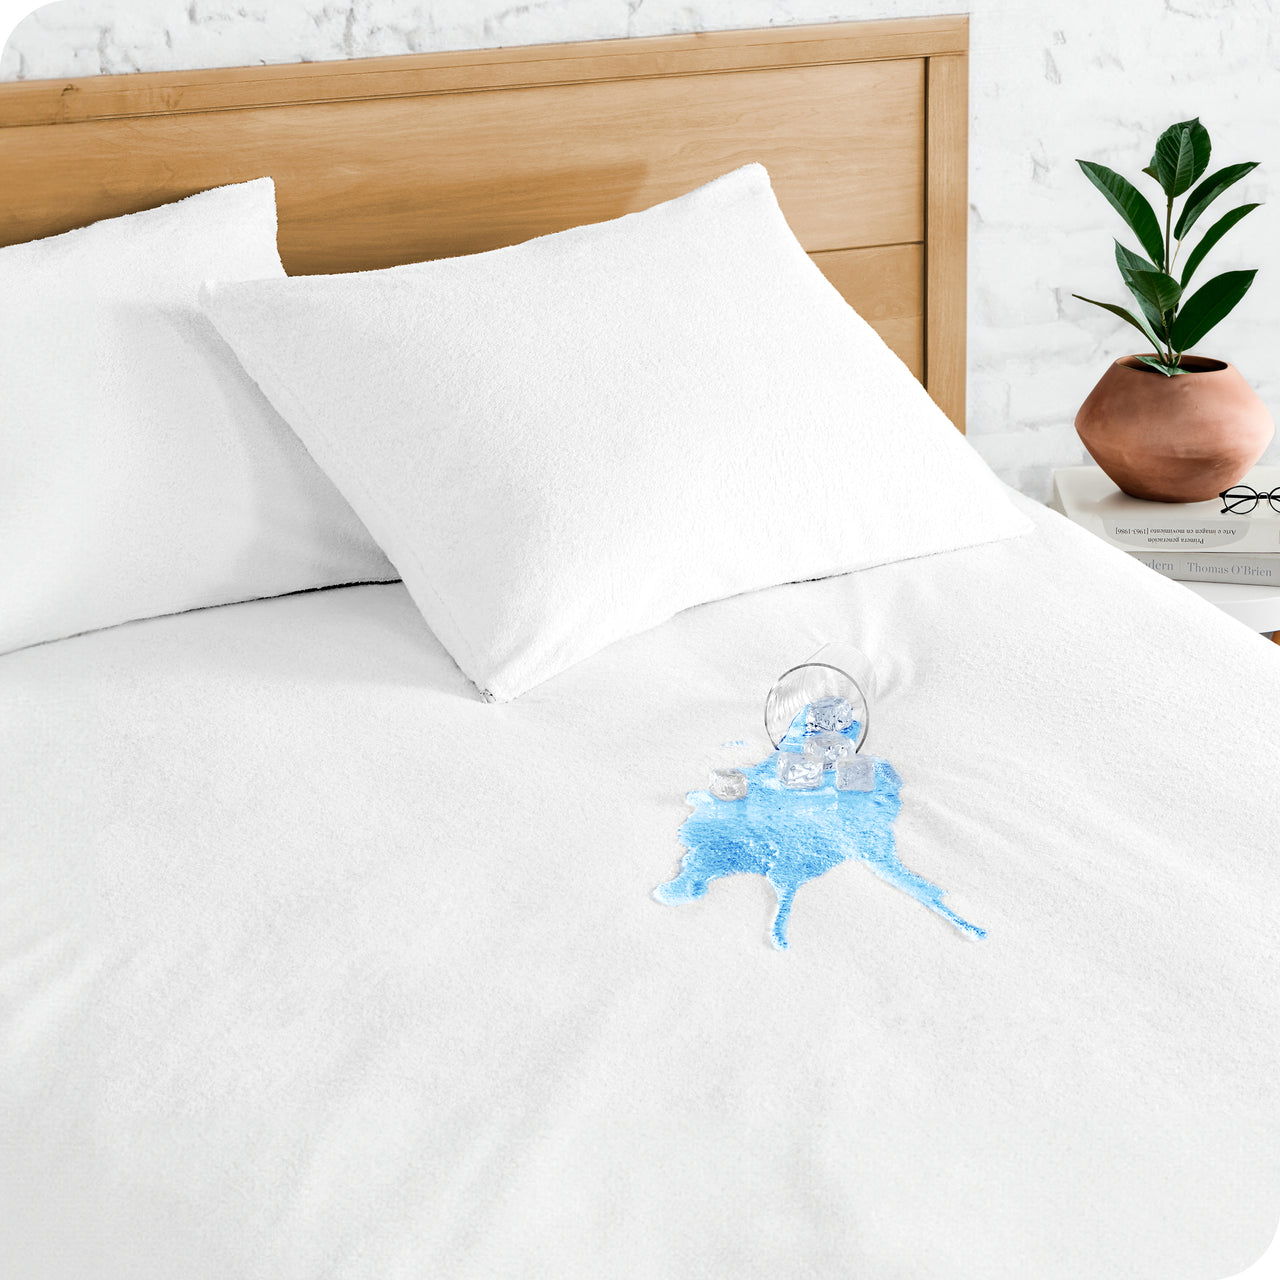 Waterproof & Breathable Terry Cotton mattress protector